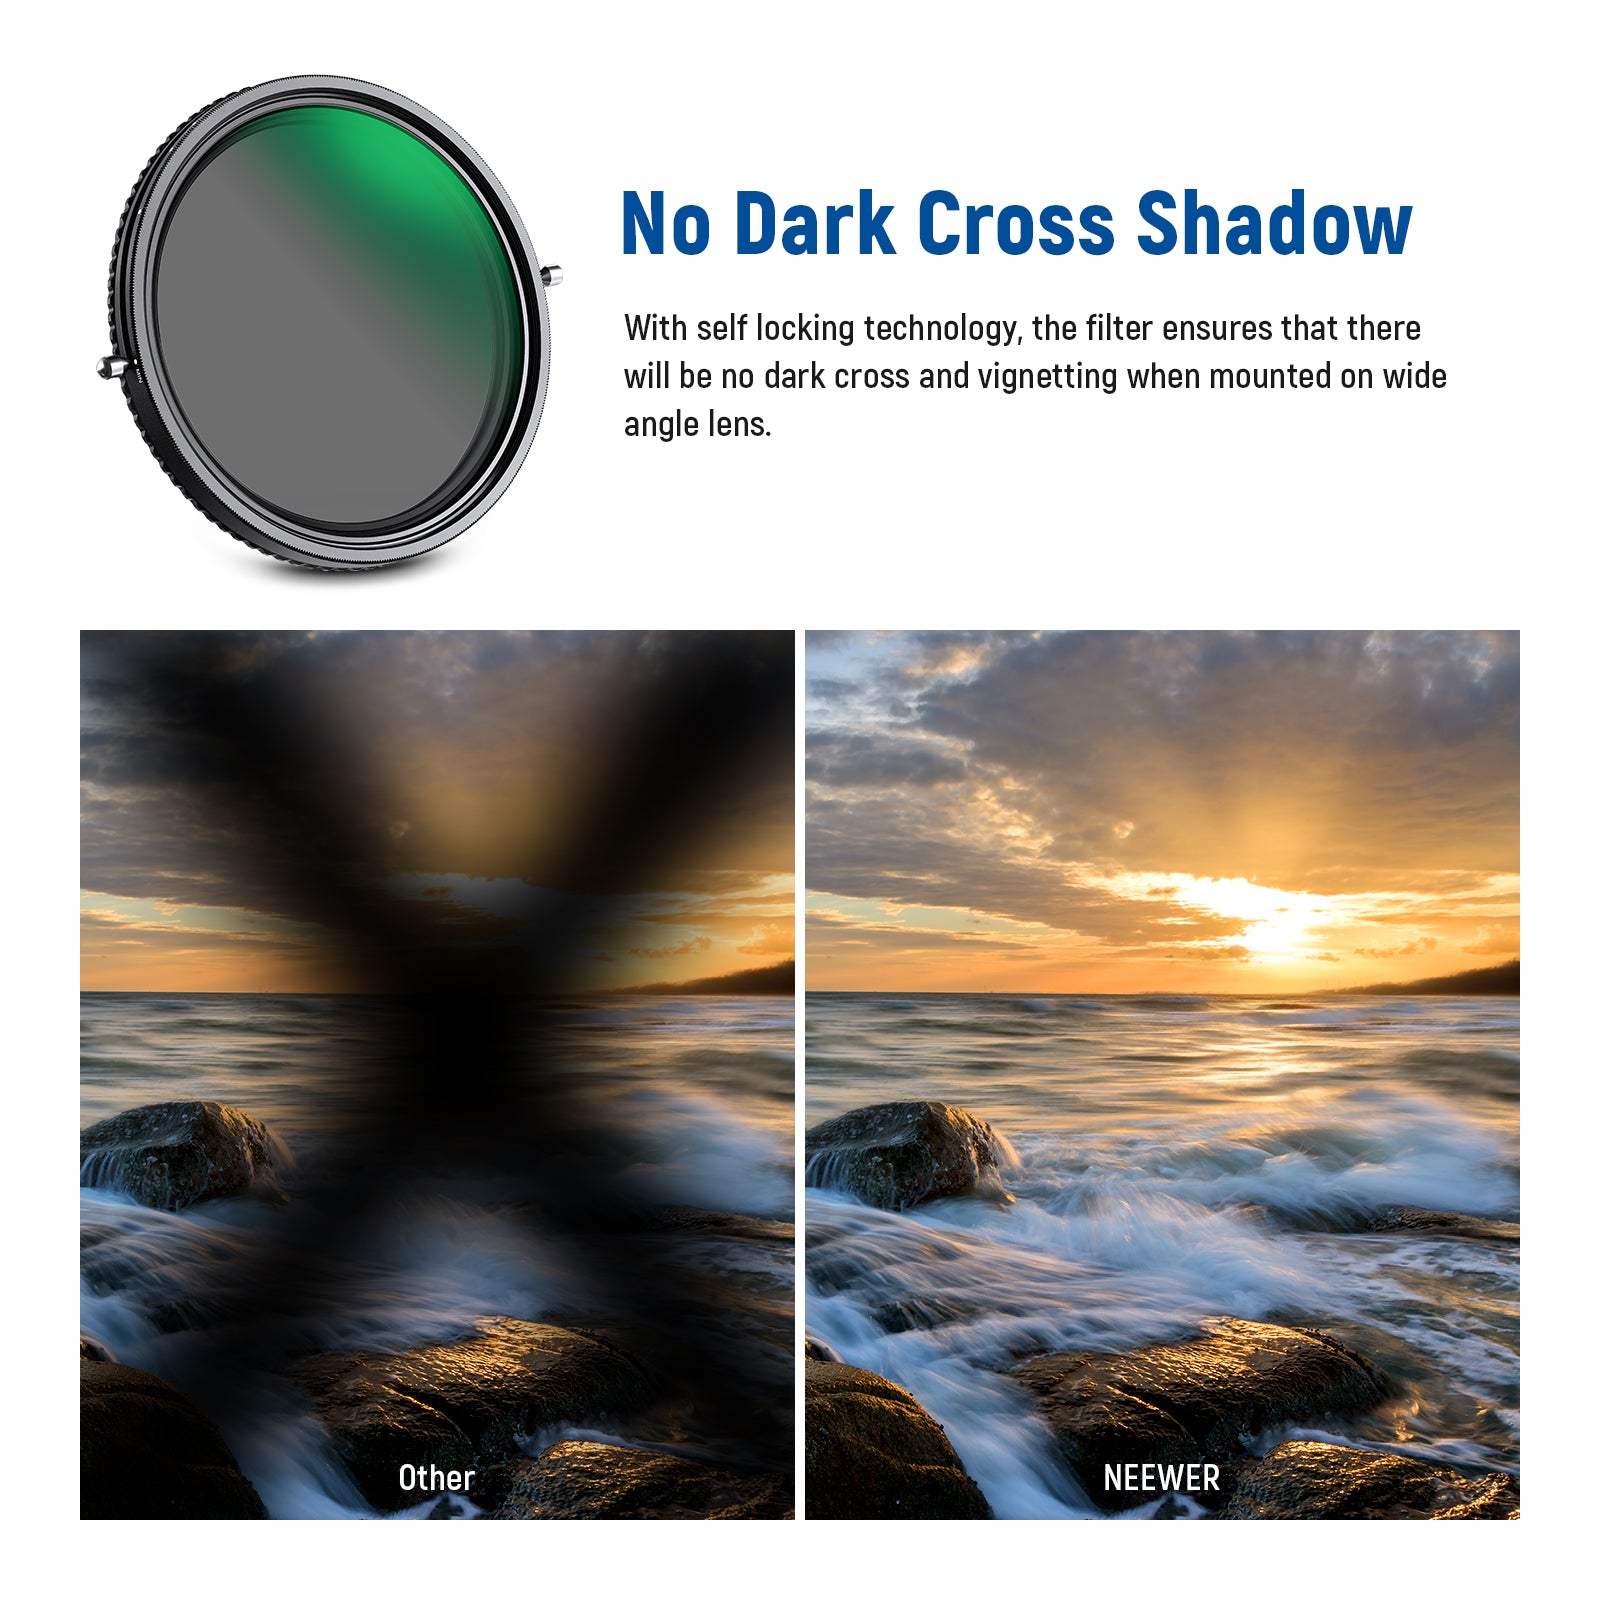 55mm ND2-32 Variable ND & CPL Filter (1-5 Stop) 2 in 1 for Camera Lens, No  X Spot Weather Sealed